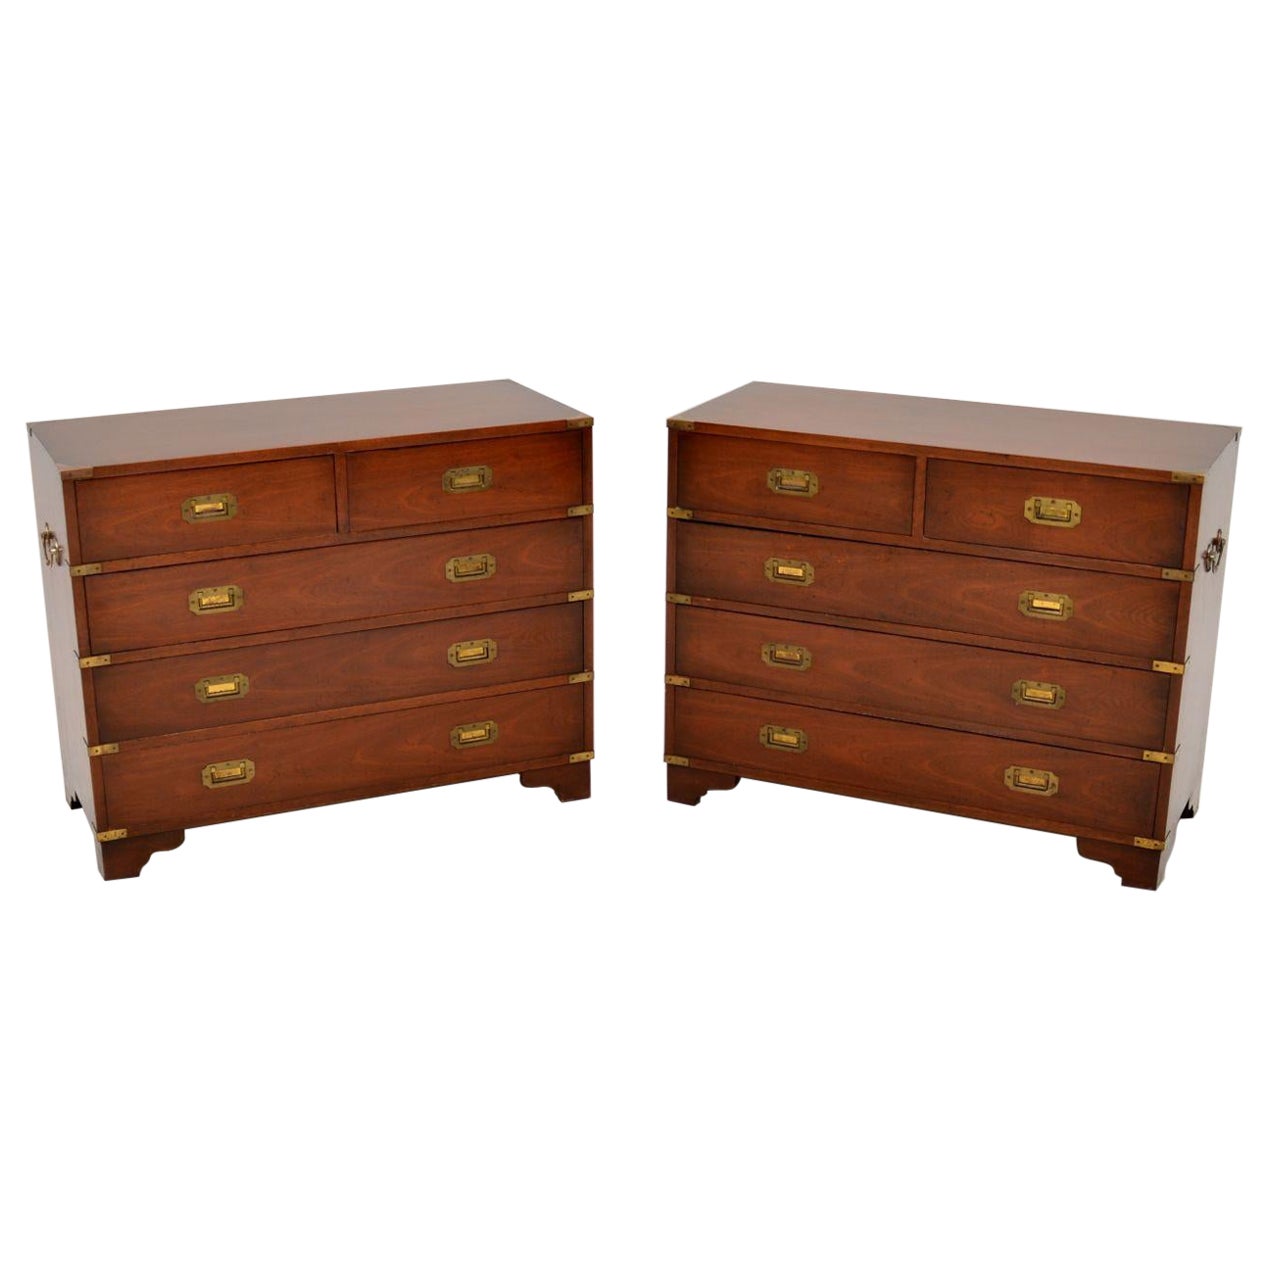 Pair of Antique Military Campaign Style Chest of Drawers